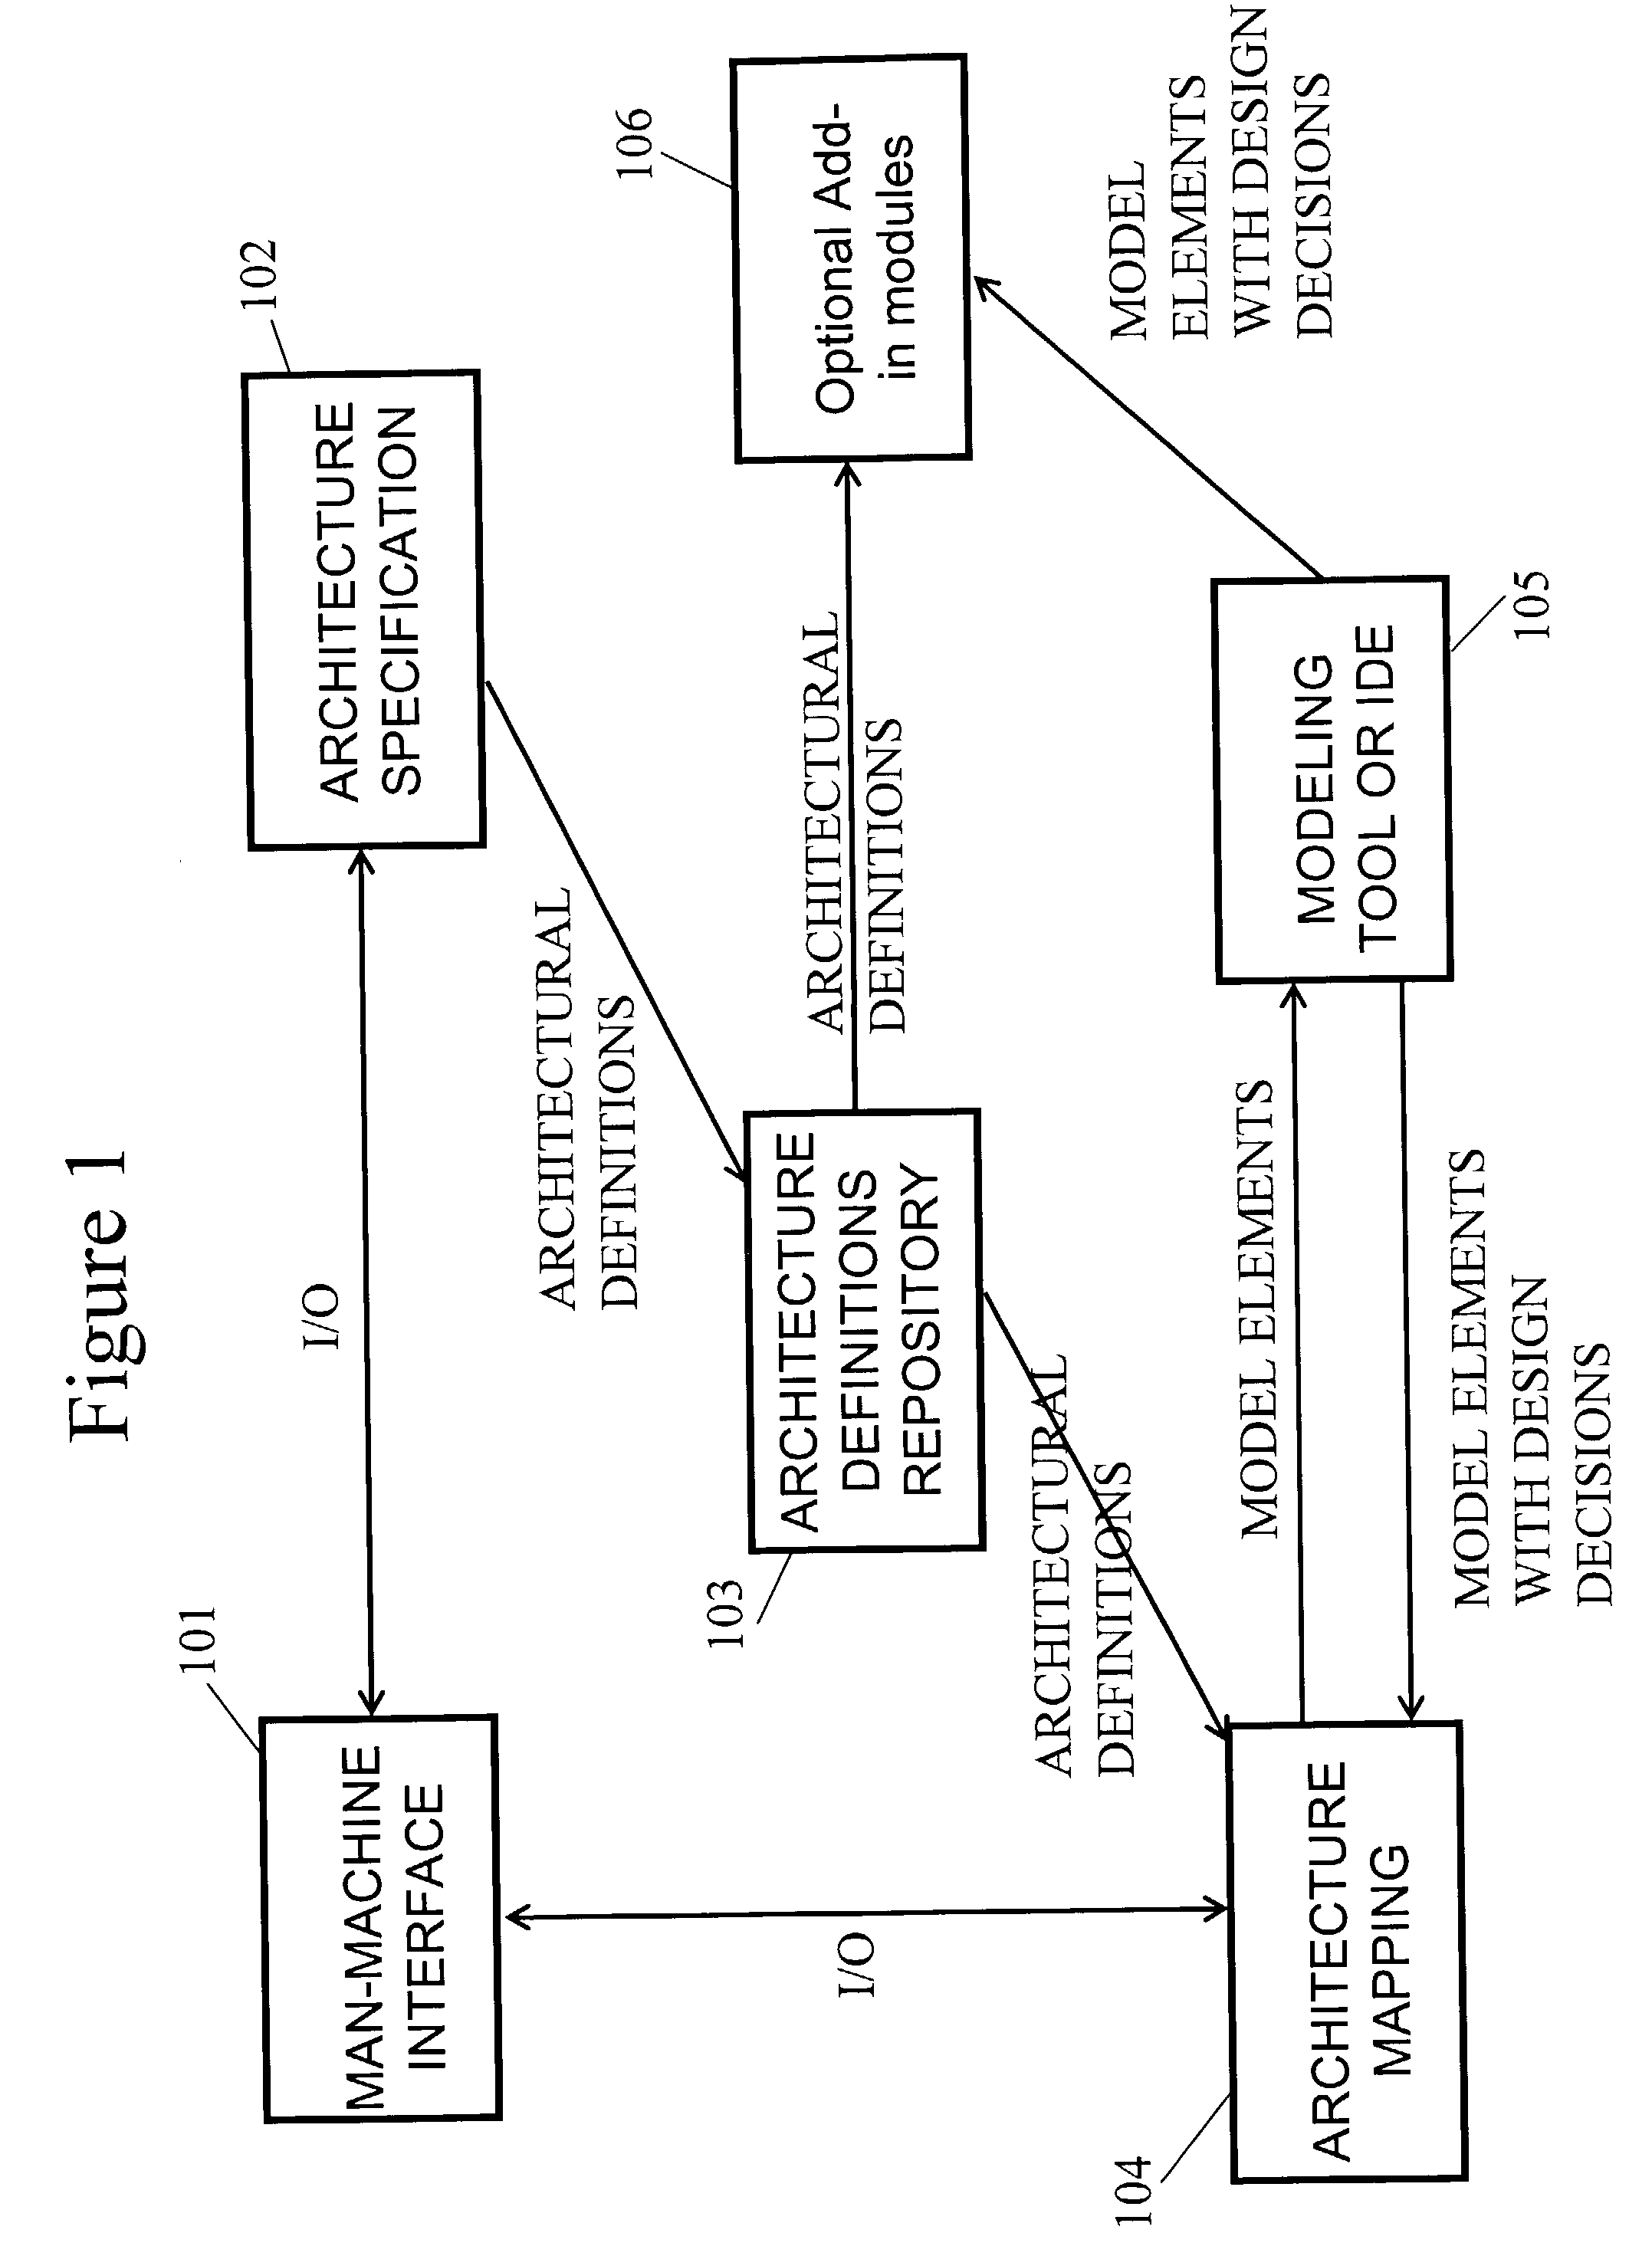 System and method for managing architectural layers within a software model